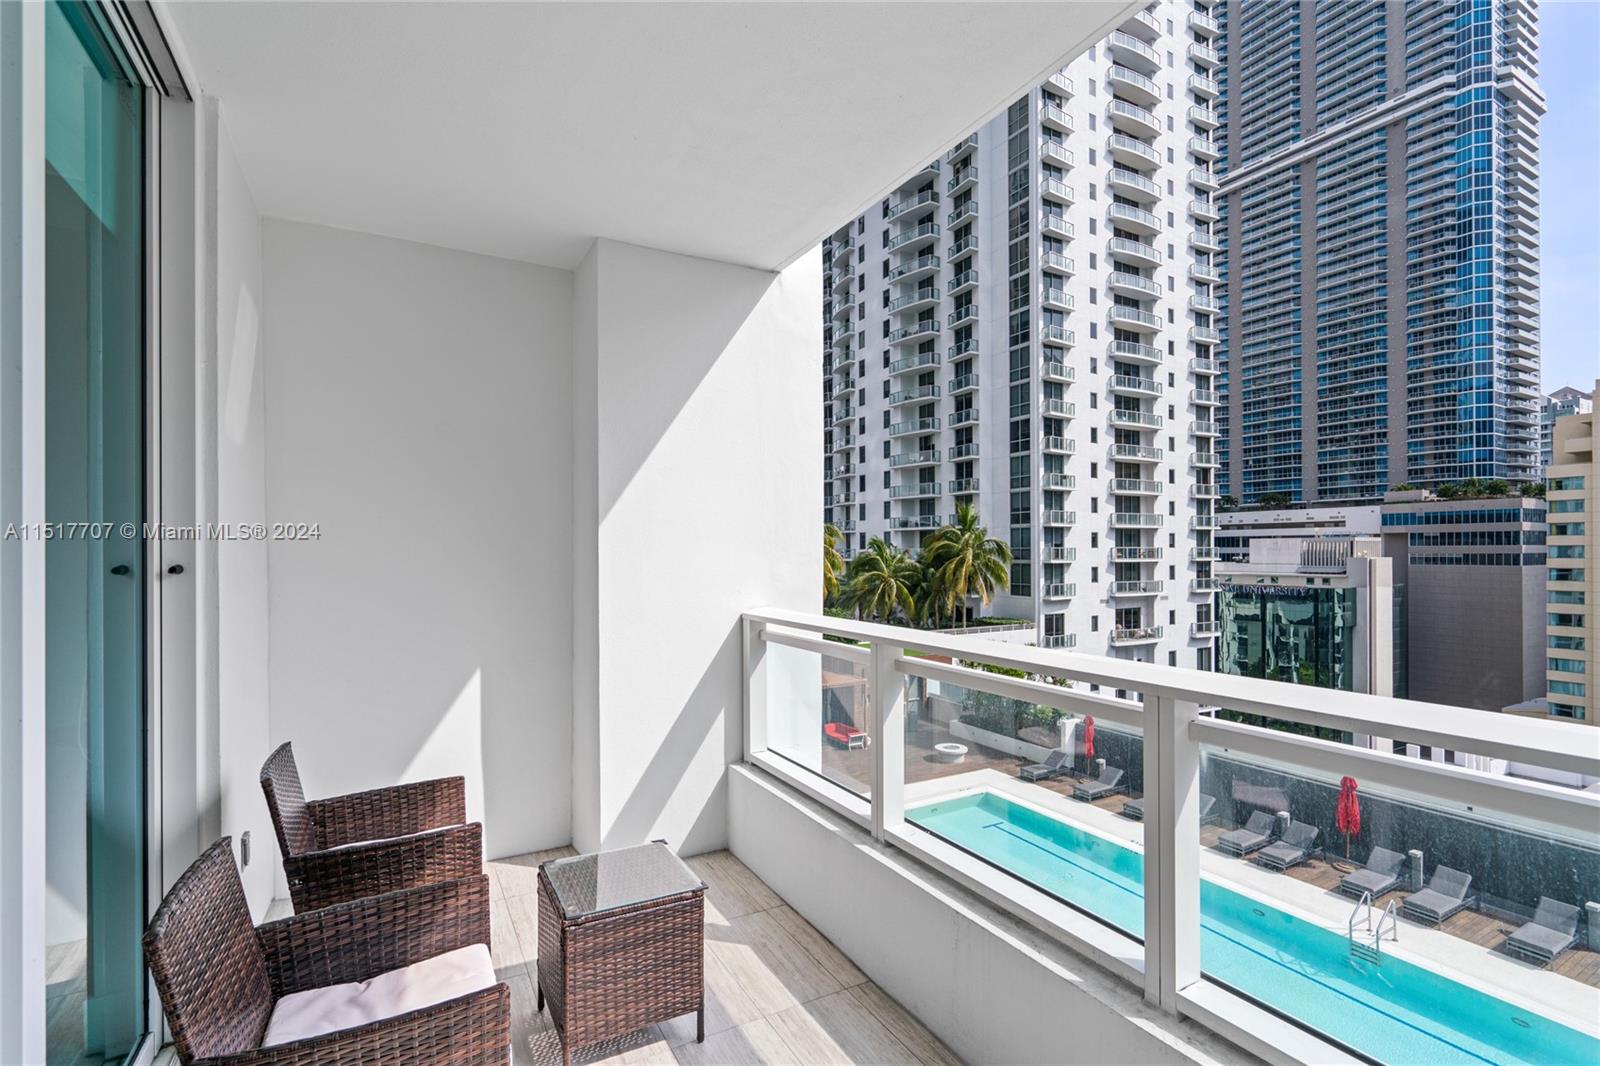 Unbelievable Views Await! Step into the heart of Brickell with this stunning 1-bed + den, 1.5-bath unit boasting top-notch appliances. Enjoy 24/7 front desk service, Wi-Fi, a lavish resident club room, a spa, fitness center, and more. Perfectly situated near Merry Brickell Village, Brickell City Centre, renowned restaurants, supermarkets, and easy expressway access. Currently rented at $3,750 until May 28th, 2024. Don't miss out on this slice of luxury living!